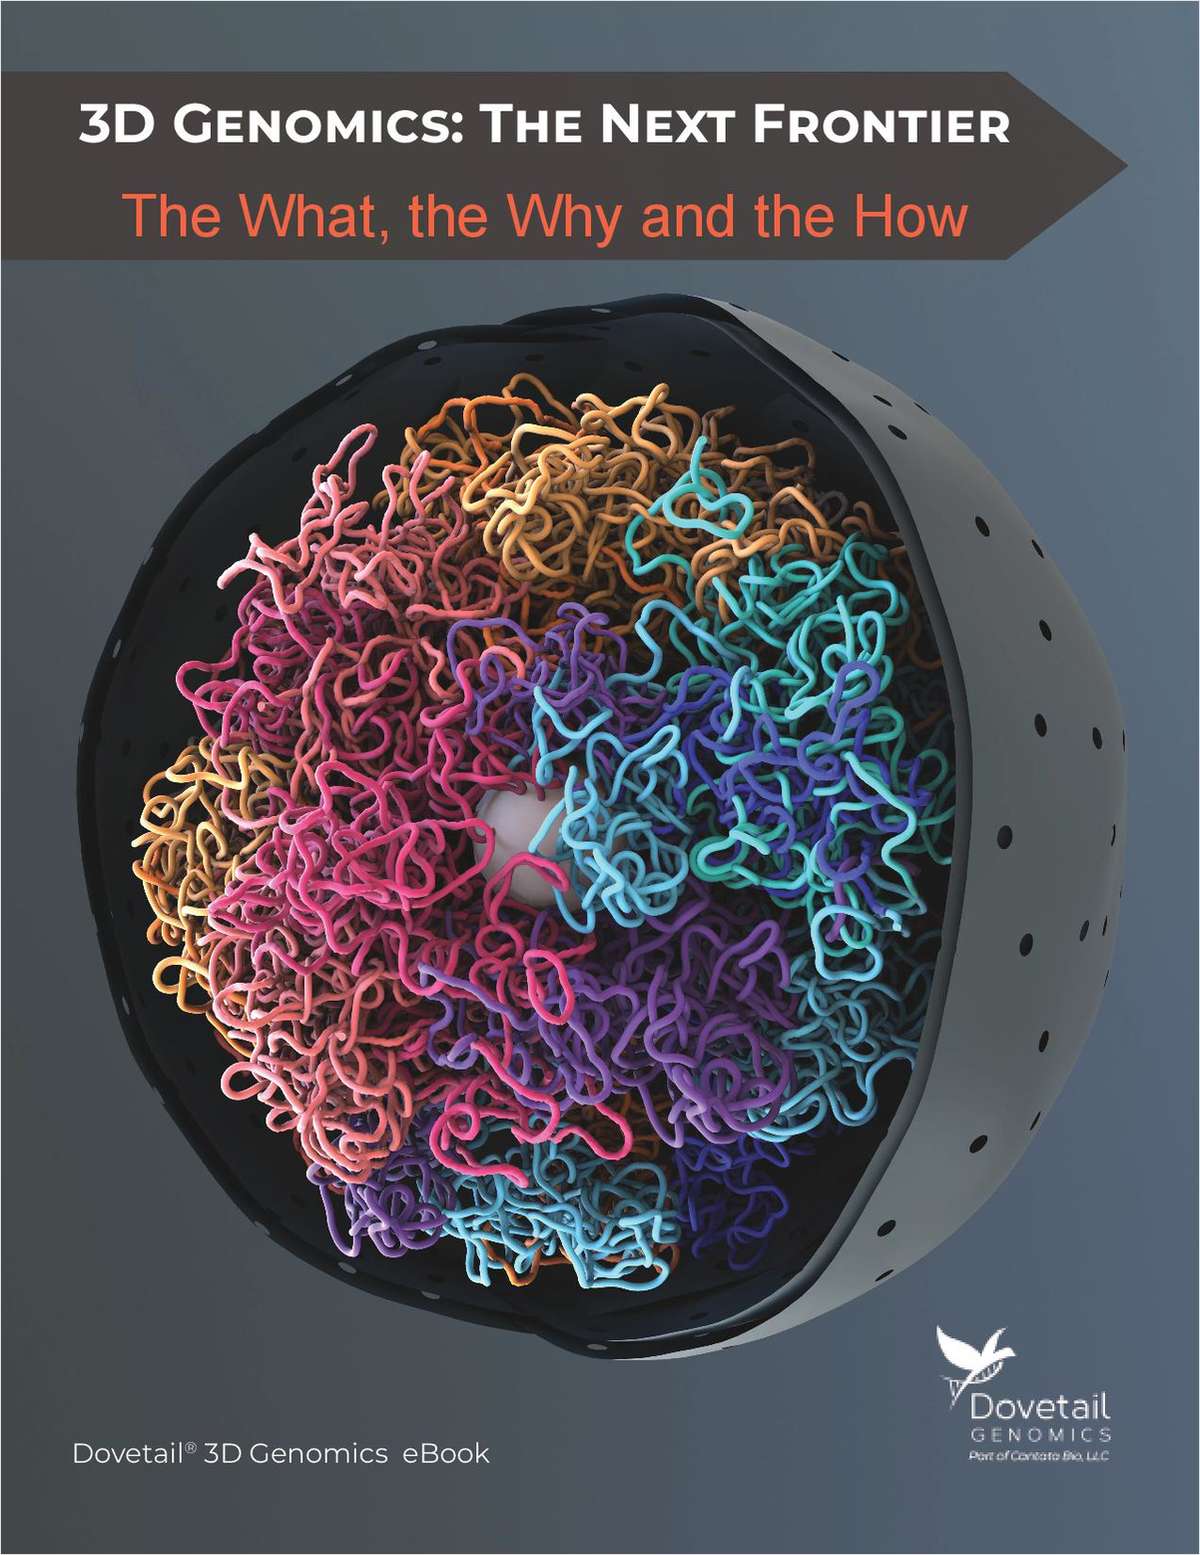 3D Genomics: The Next Frontier -- The What, the Why, and the How